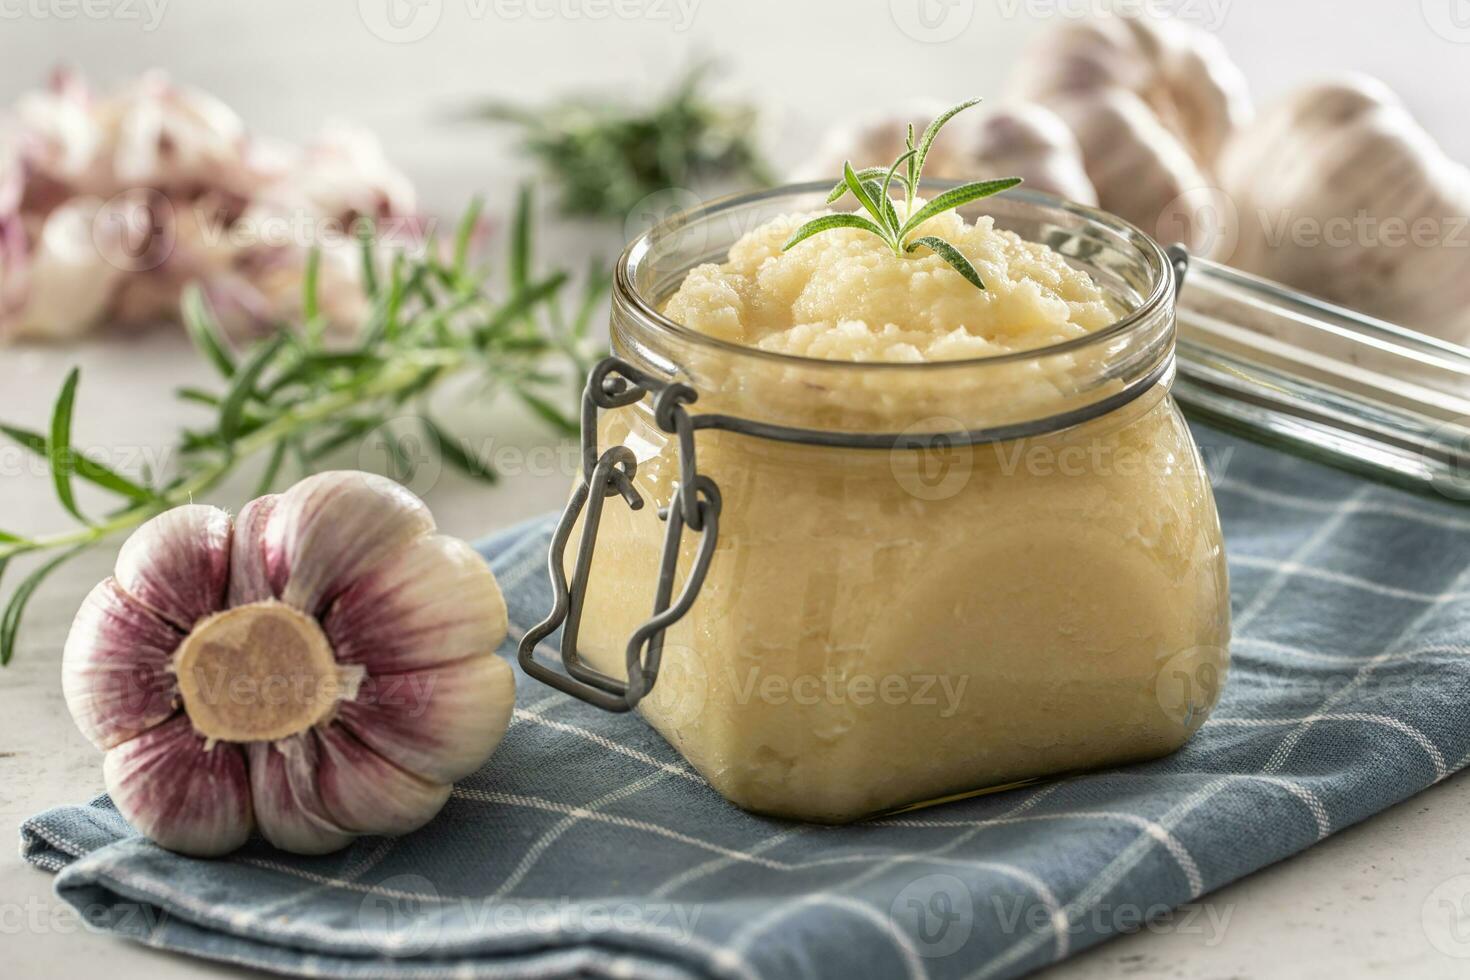 Aromatic garlic paste in a glass jar laid on rustic kitchen cloth with bulbs and peeled cloves and rosemary photo